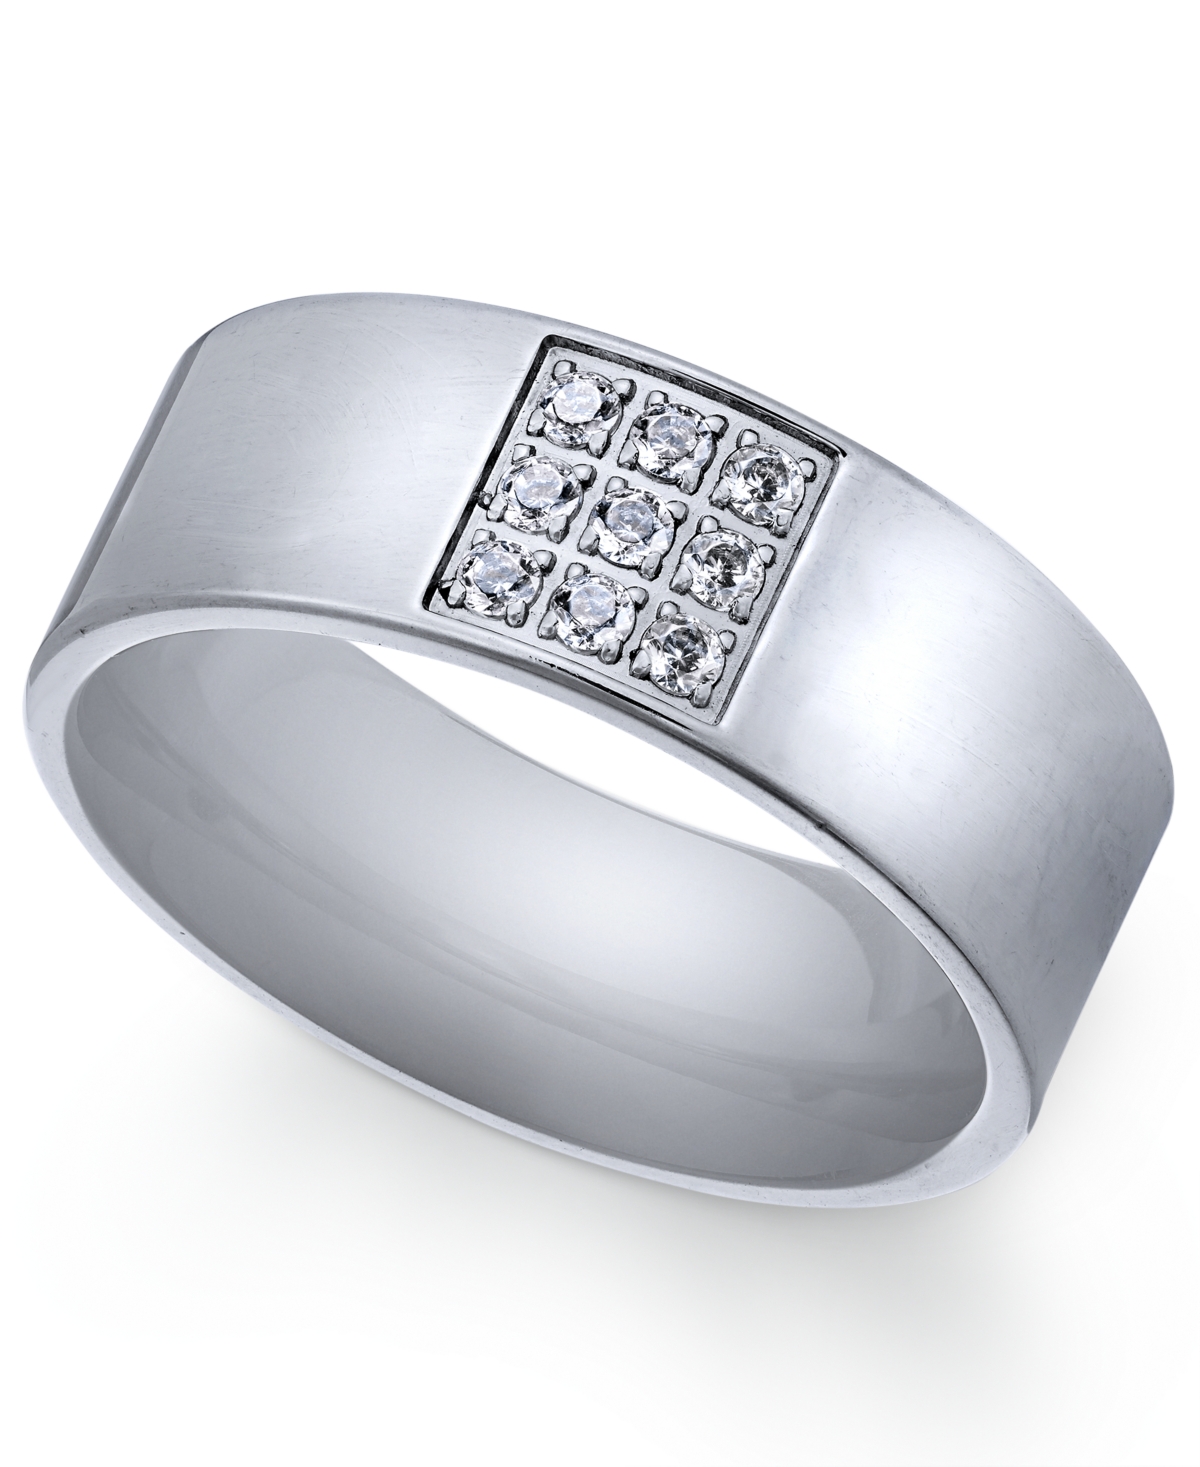 Men's Stainless Steel Cubic Zirconia Ring - Silver